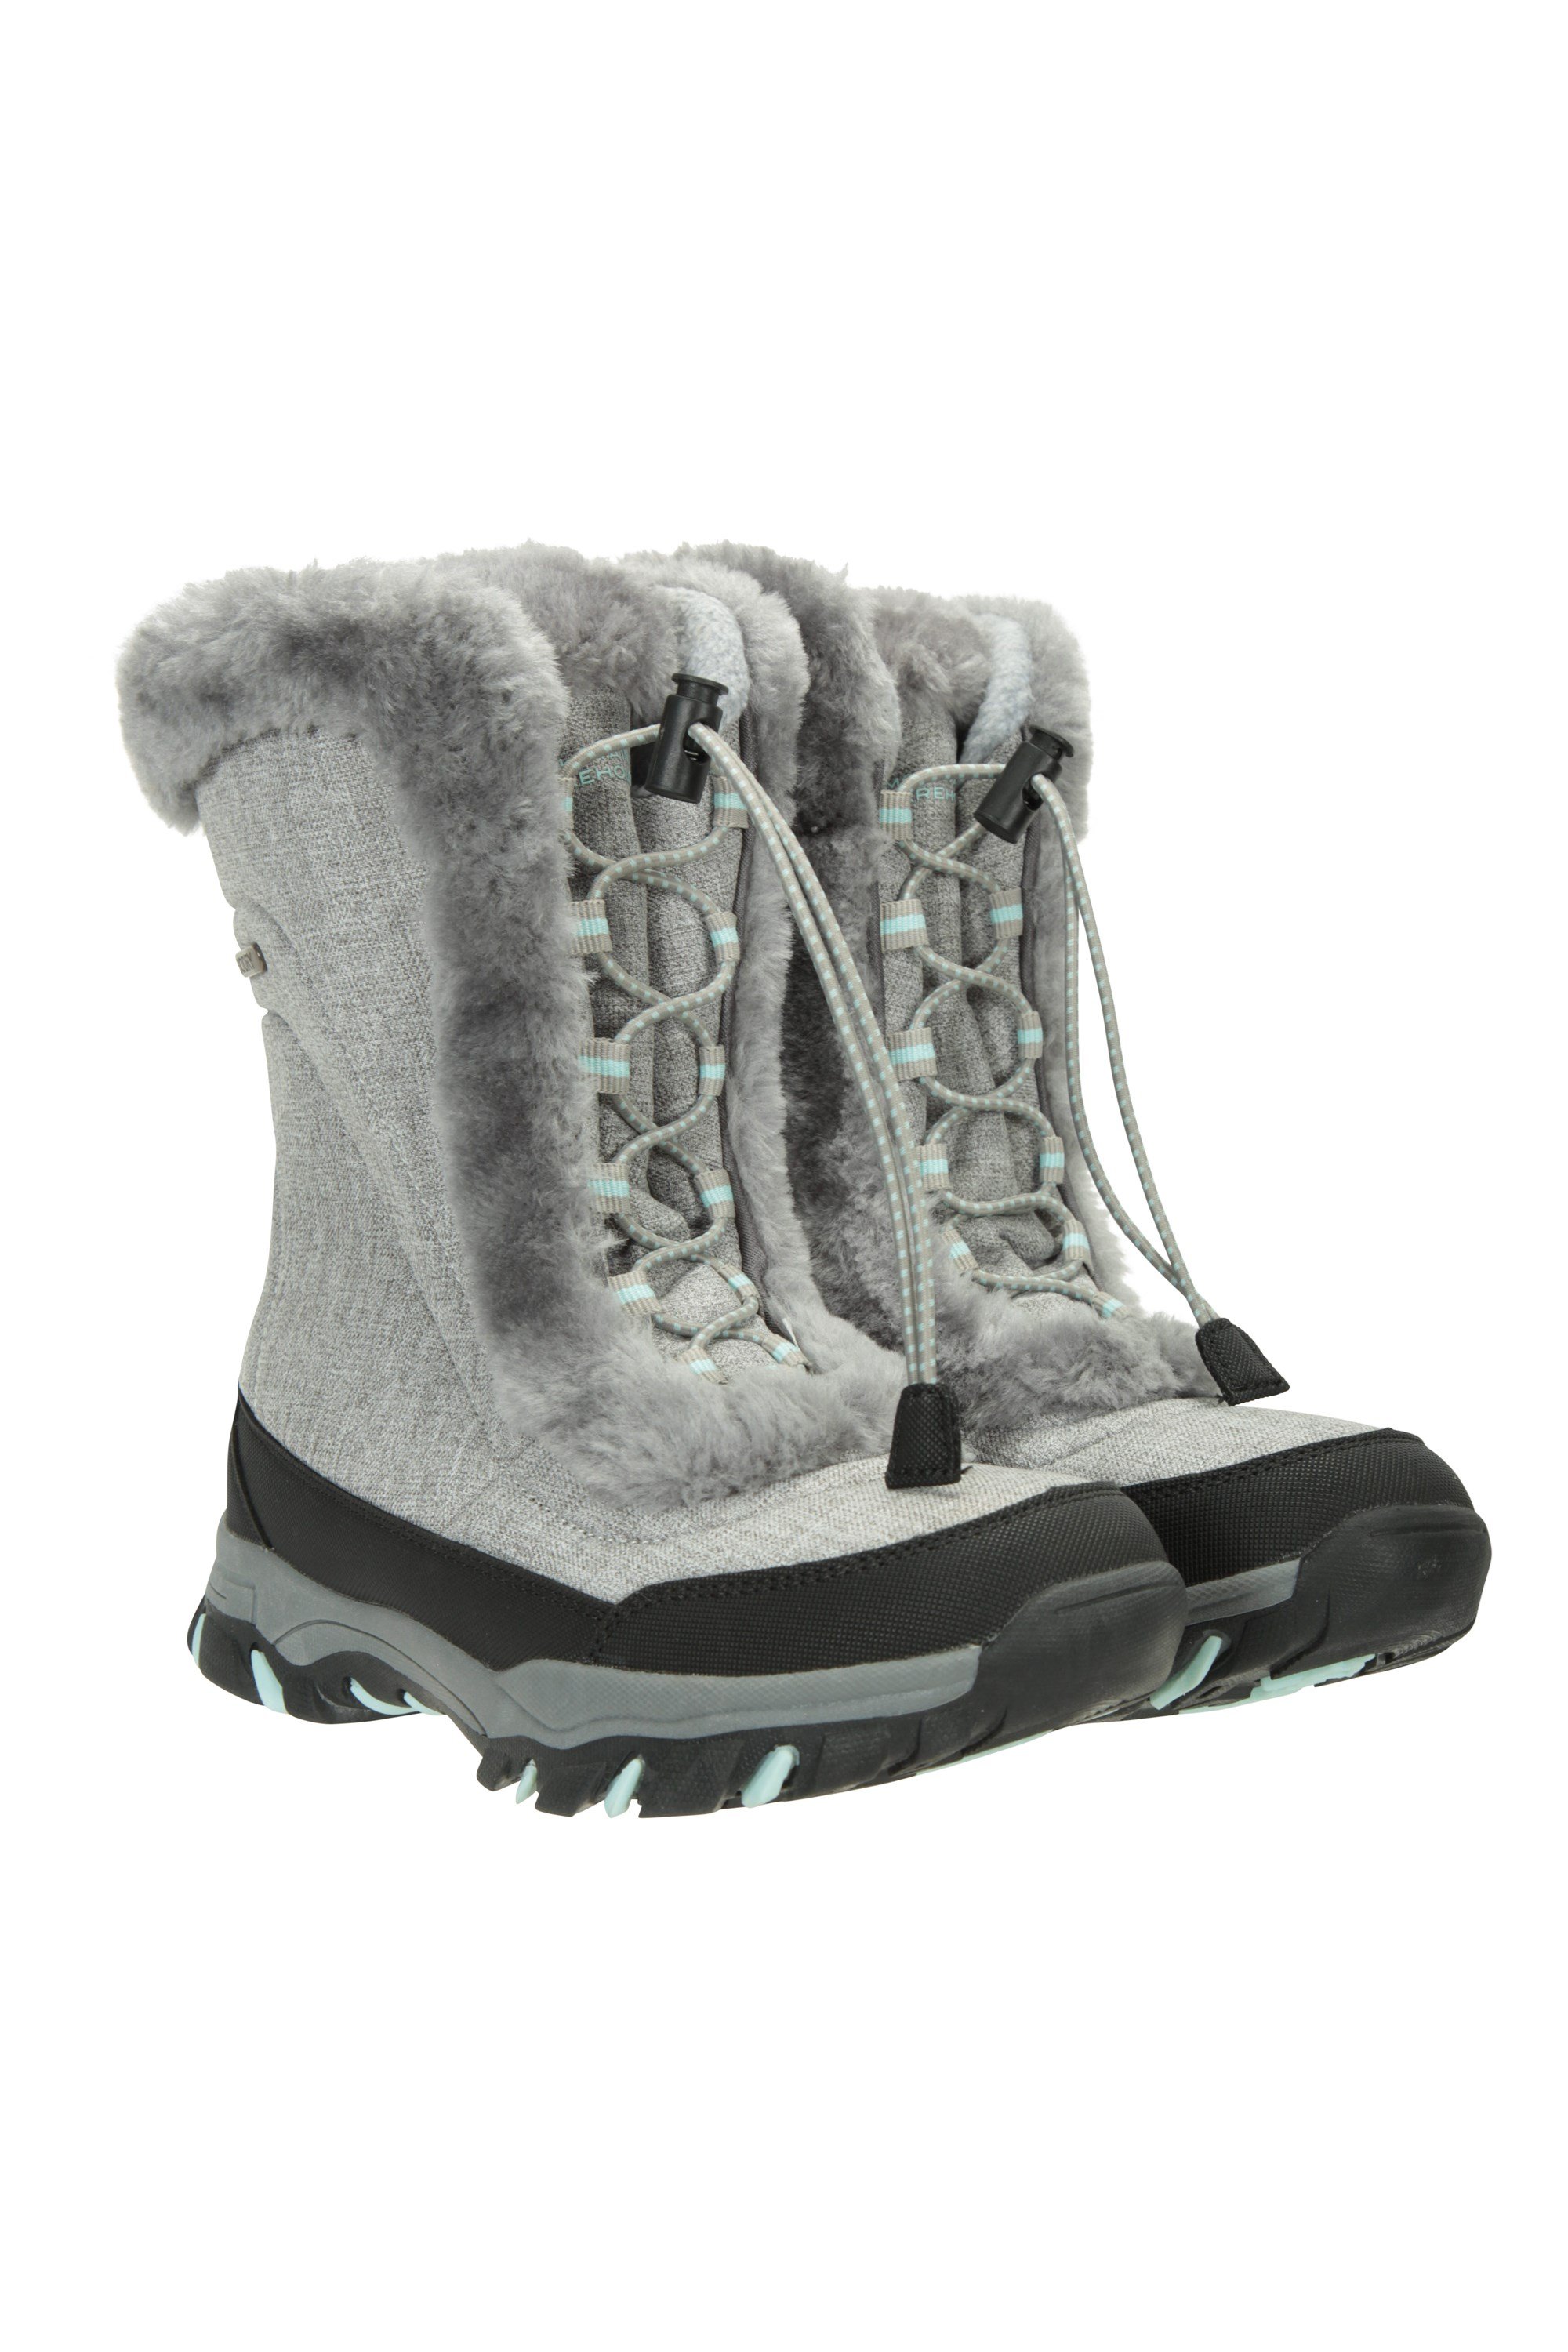 Ohio Youth Snow Boots | Mountain 